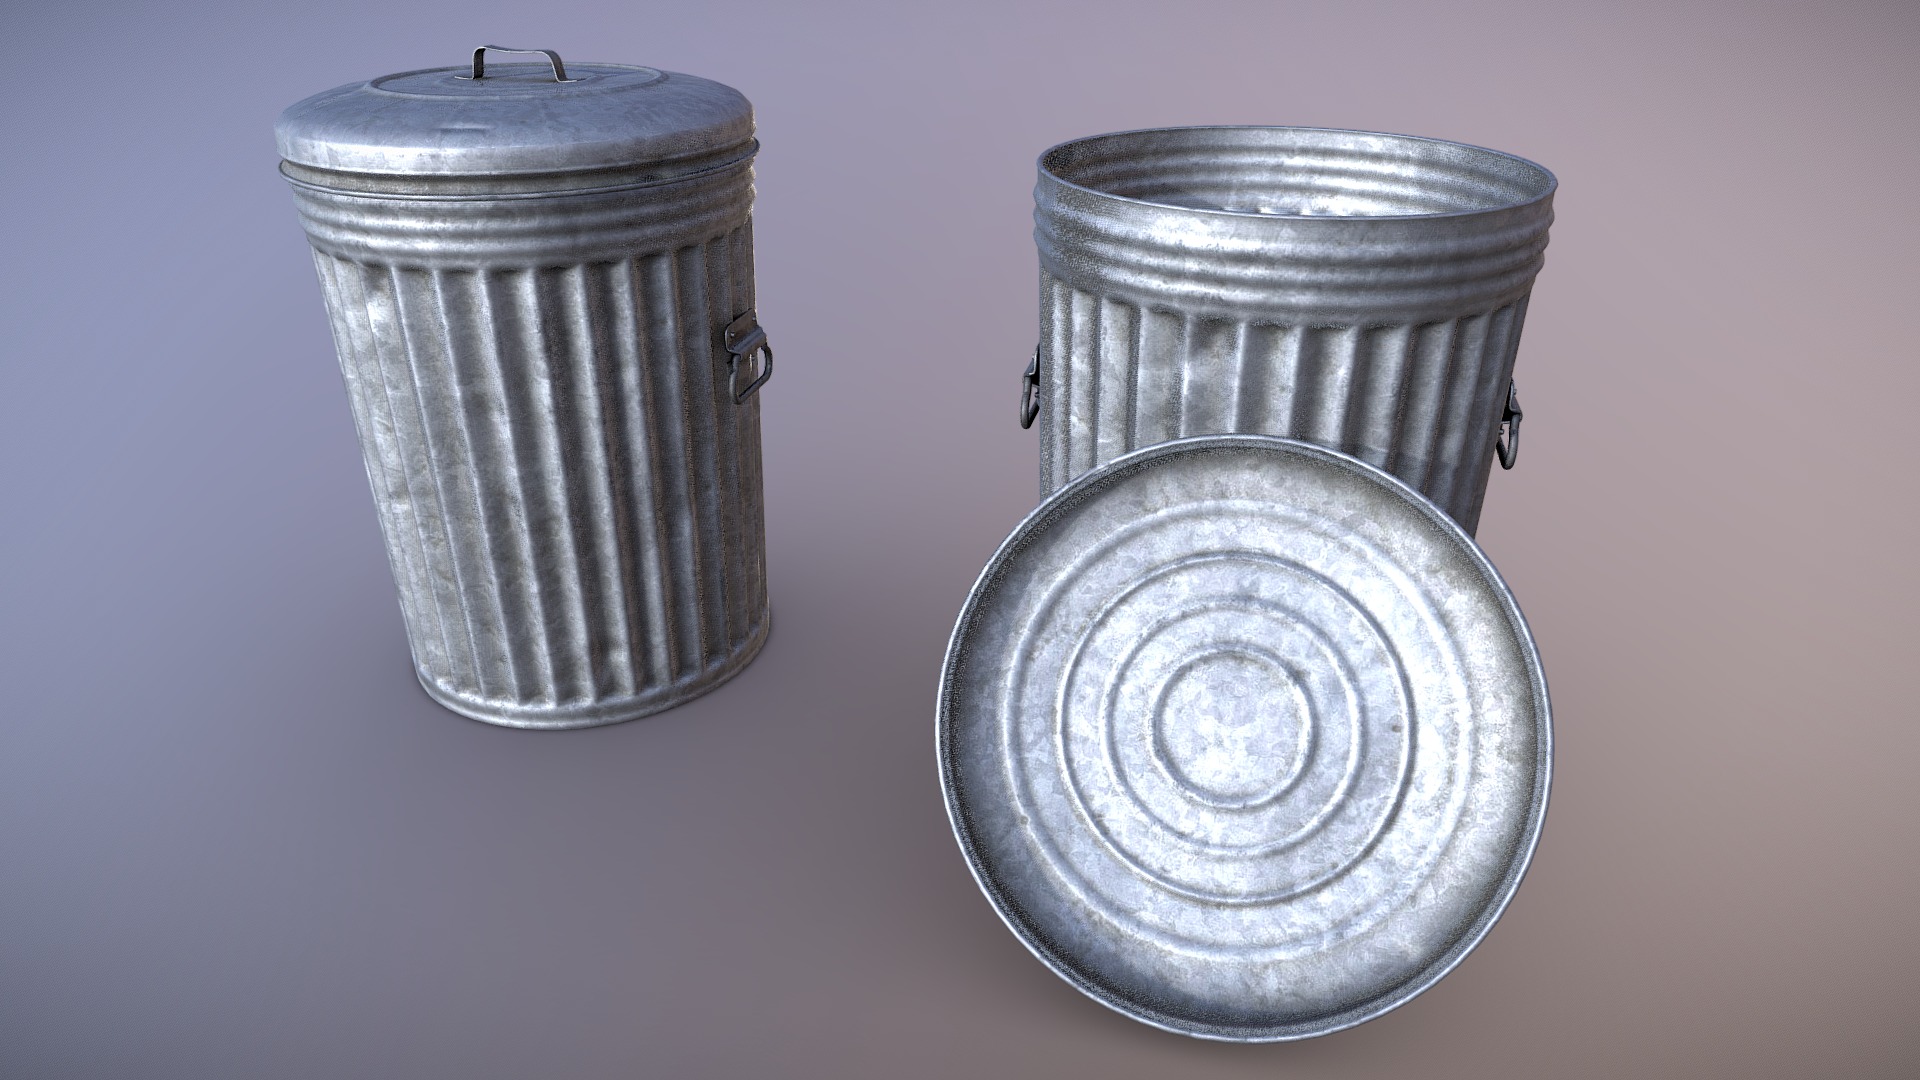 3D model Trash Can – For Sale - This is a 3D model of the Trash Can - For Sale. The 3D model is about a couple of metal containers.